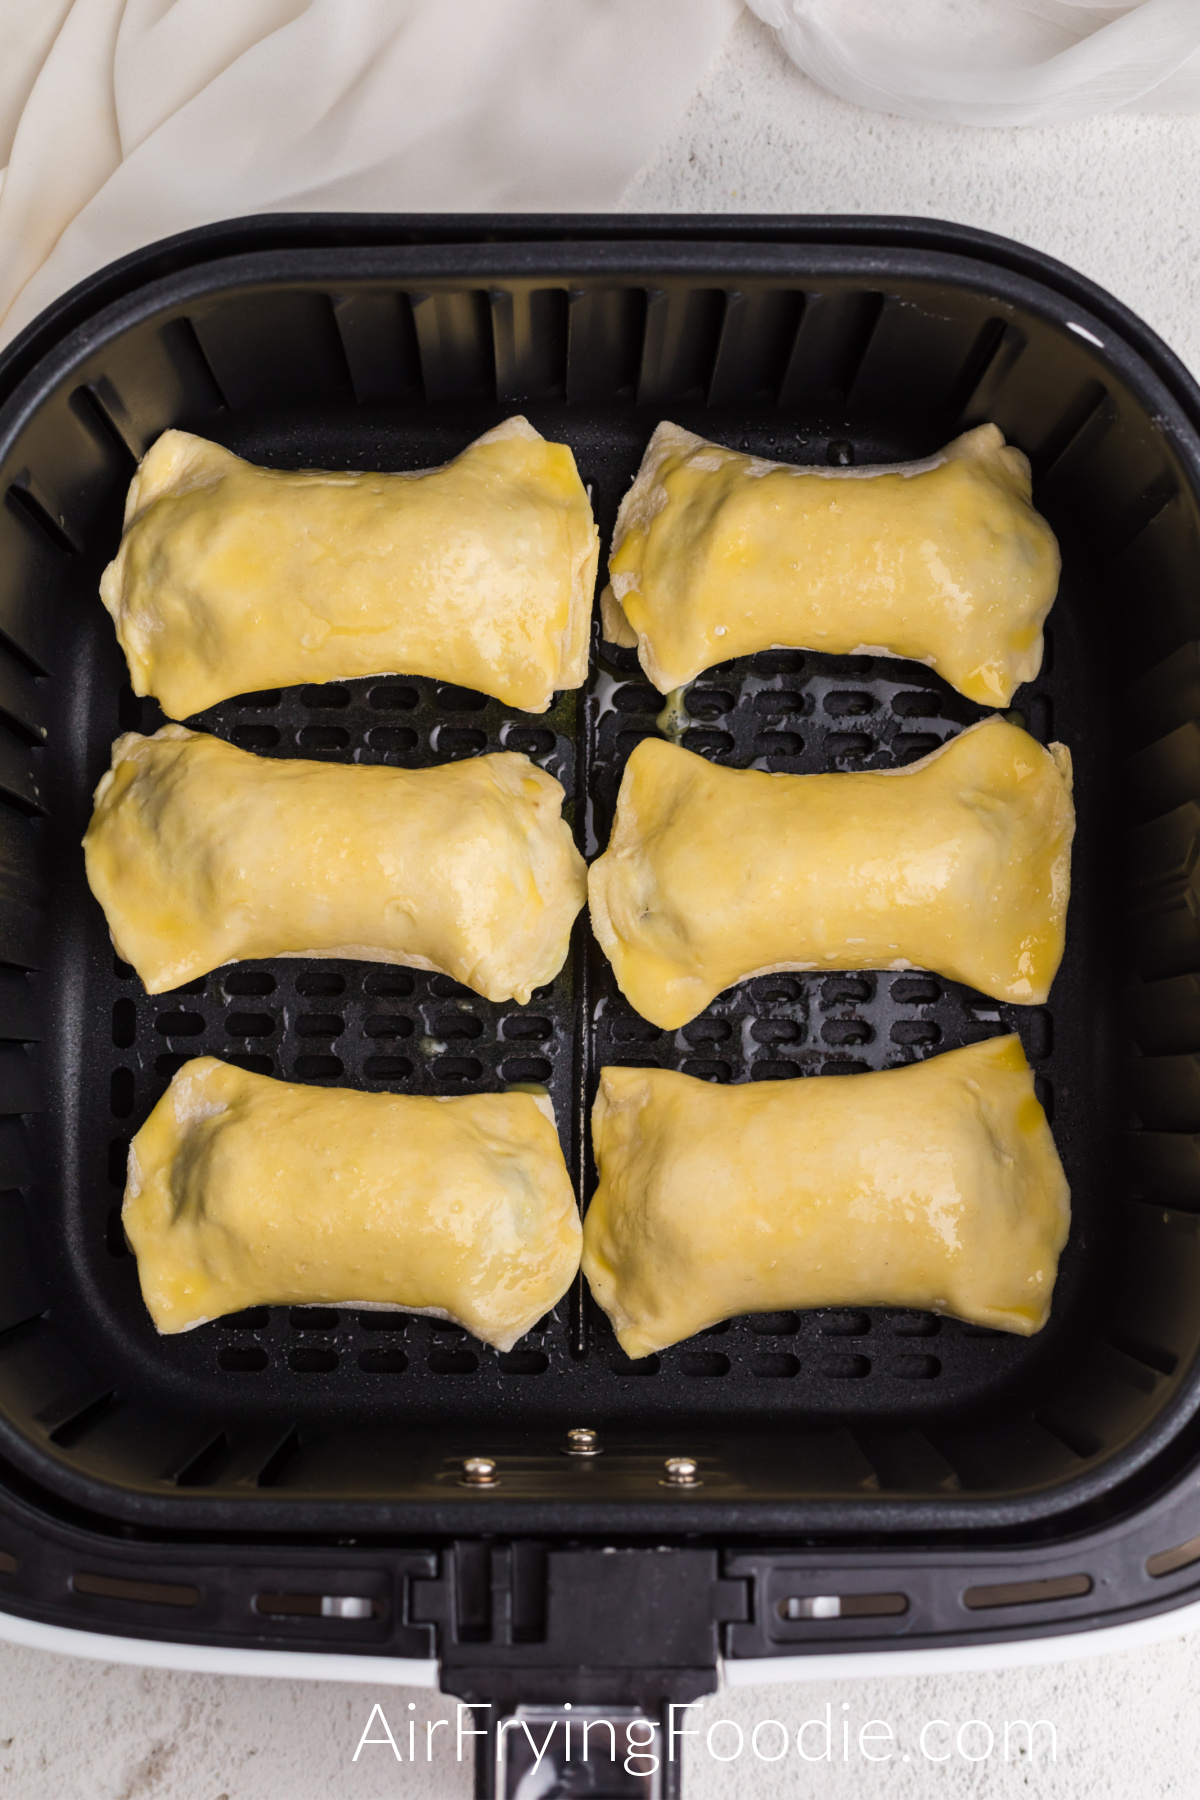 Sausage rolls brushed with egg and placed in a single layer in the basket of the air fryer.